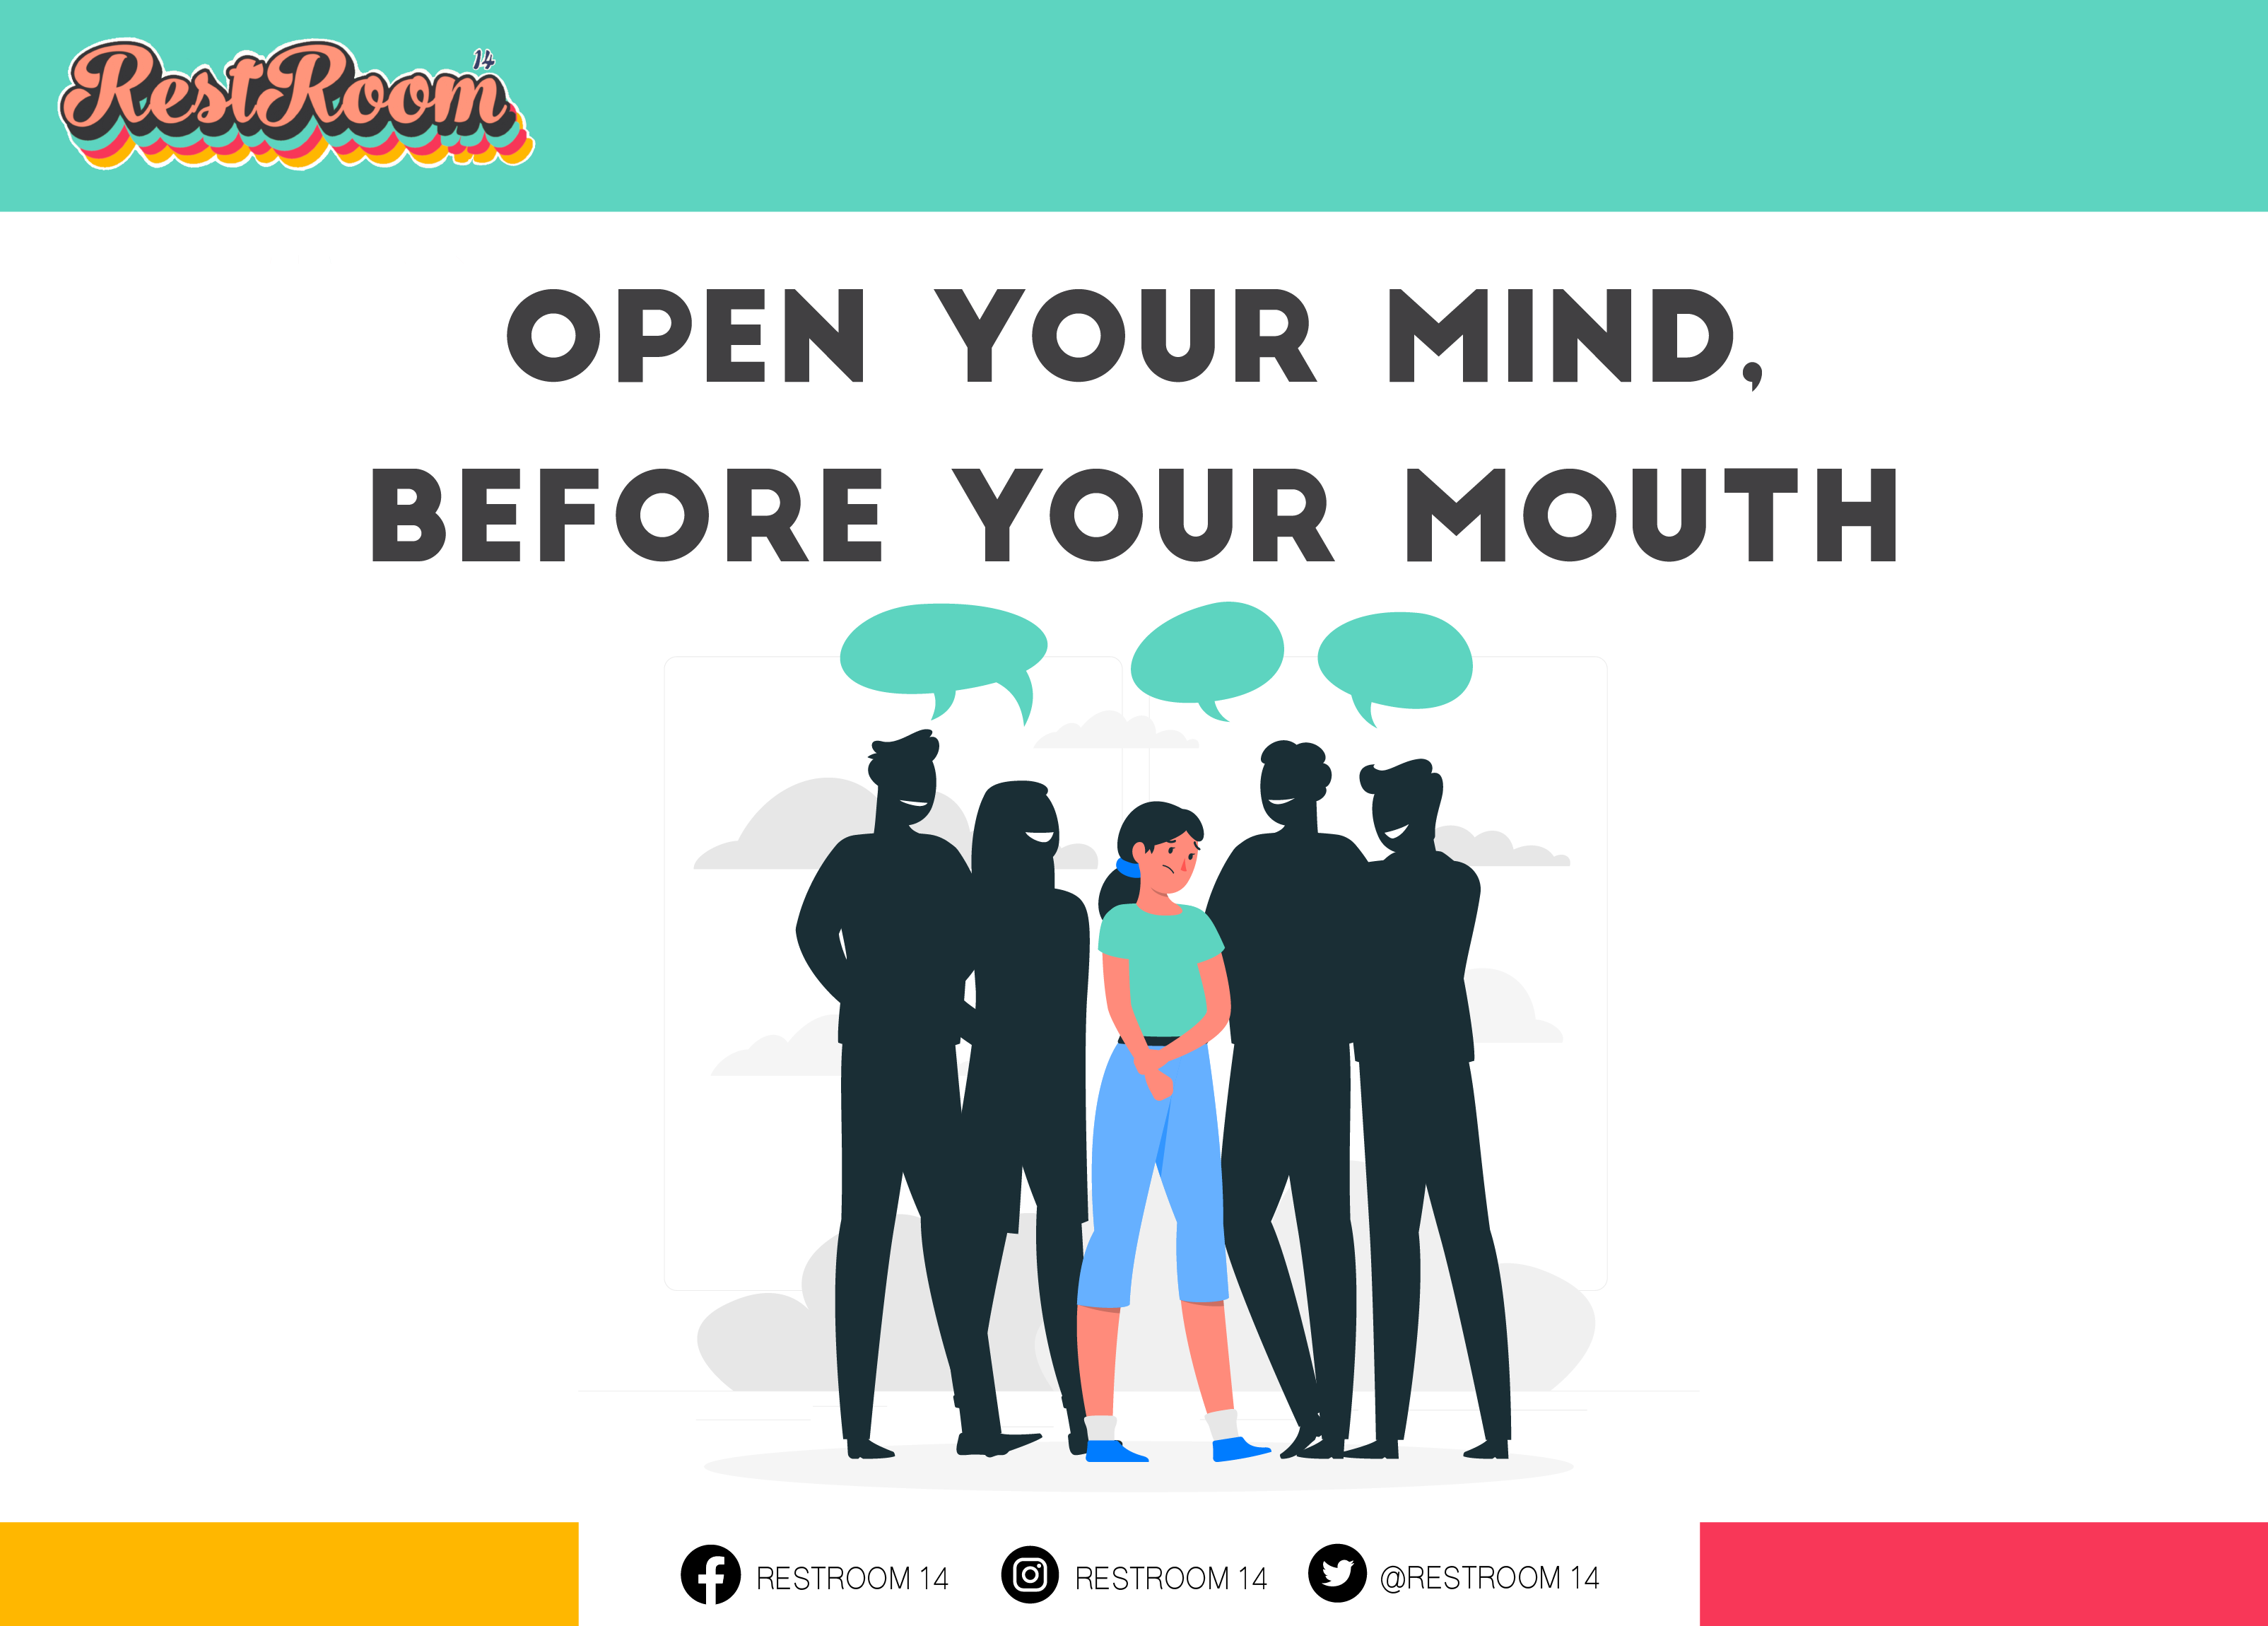 Open your mind before you mouth